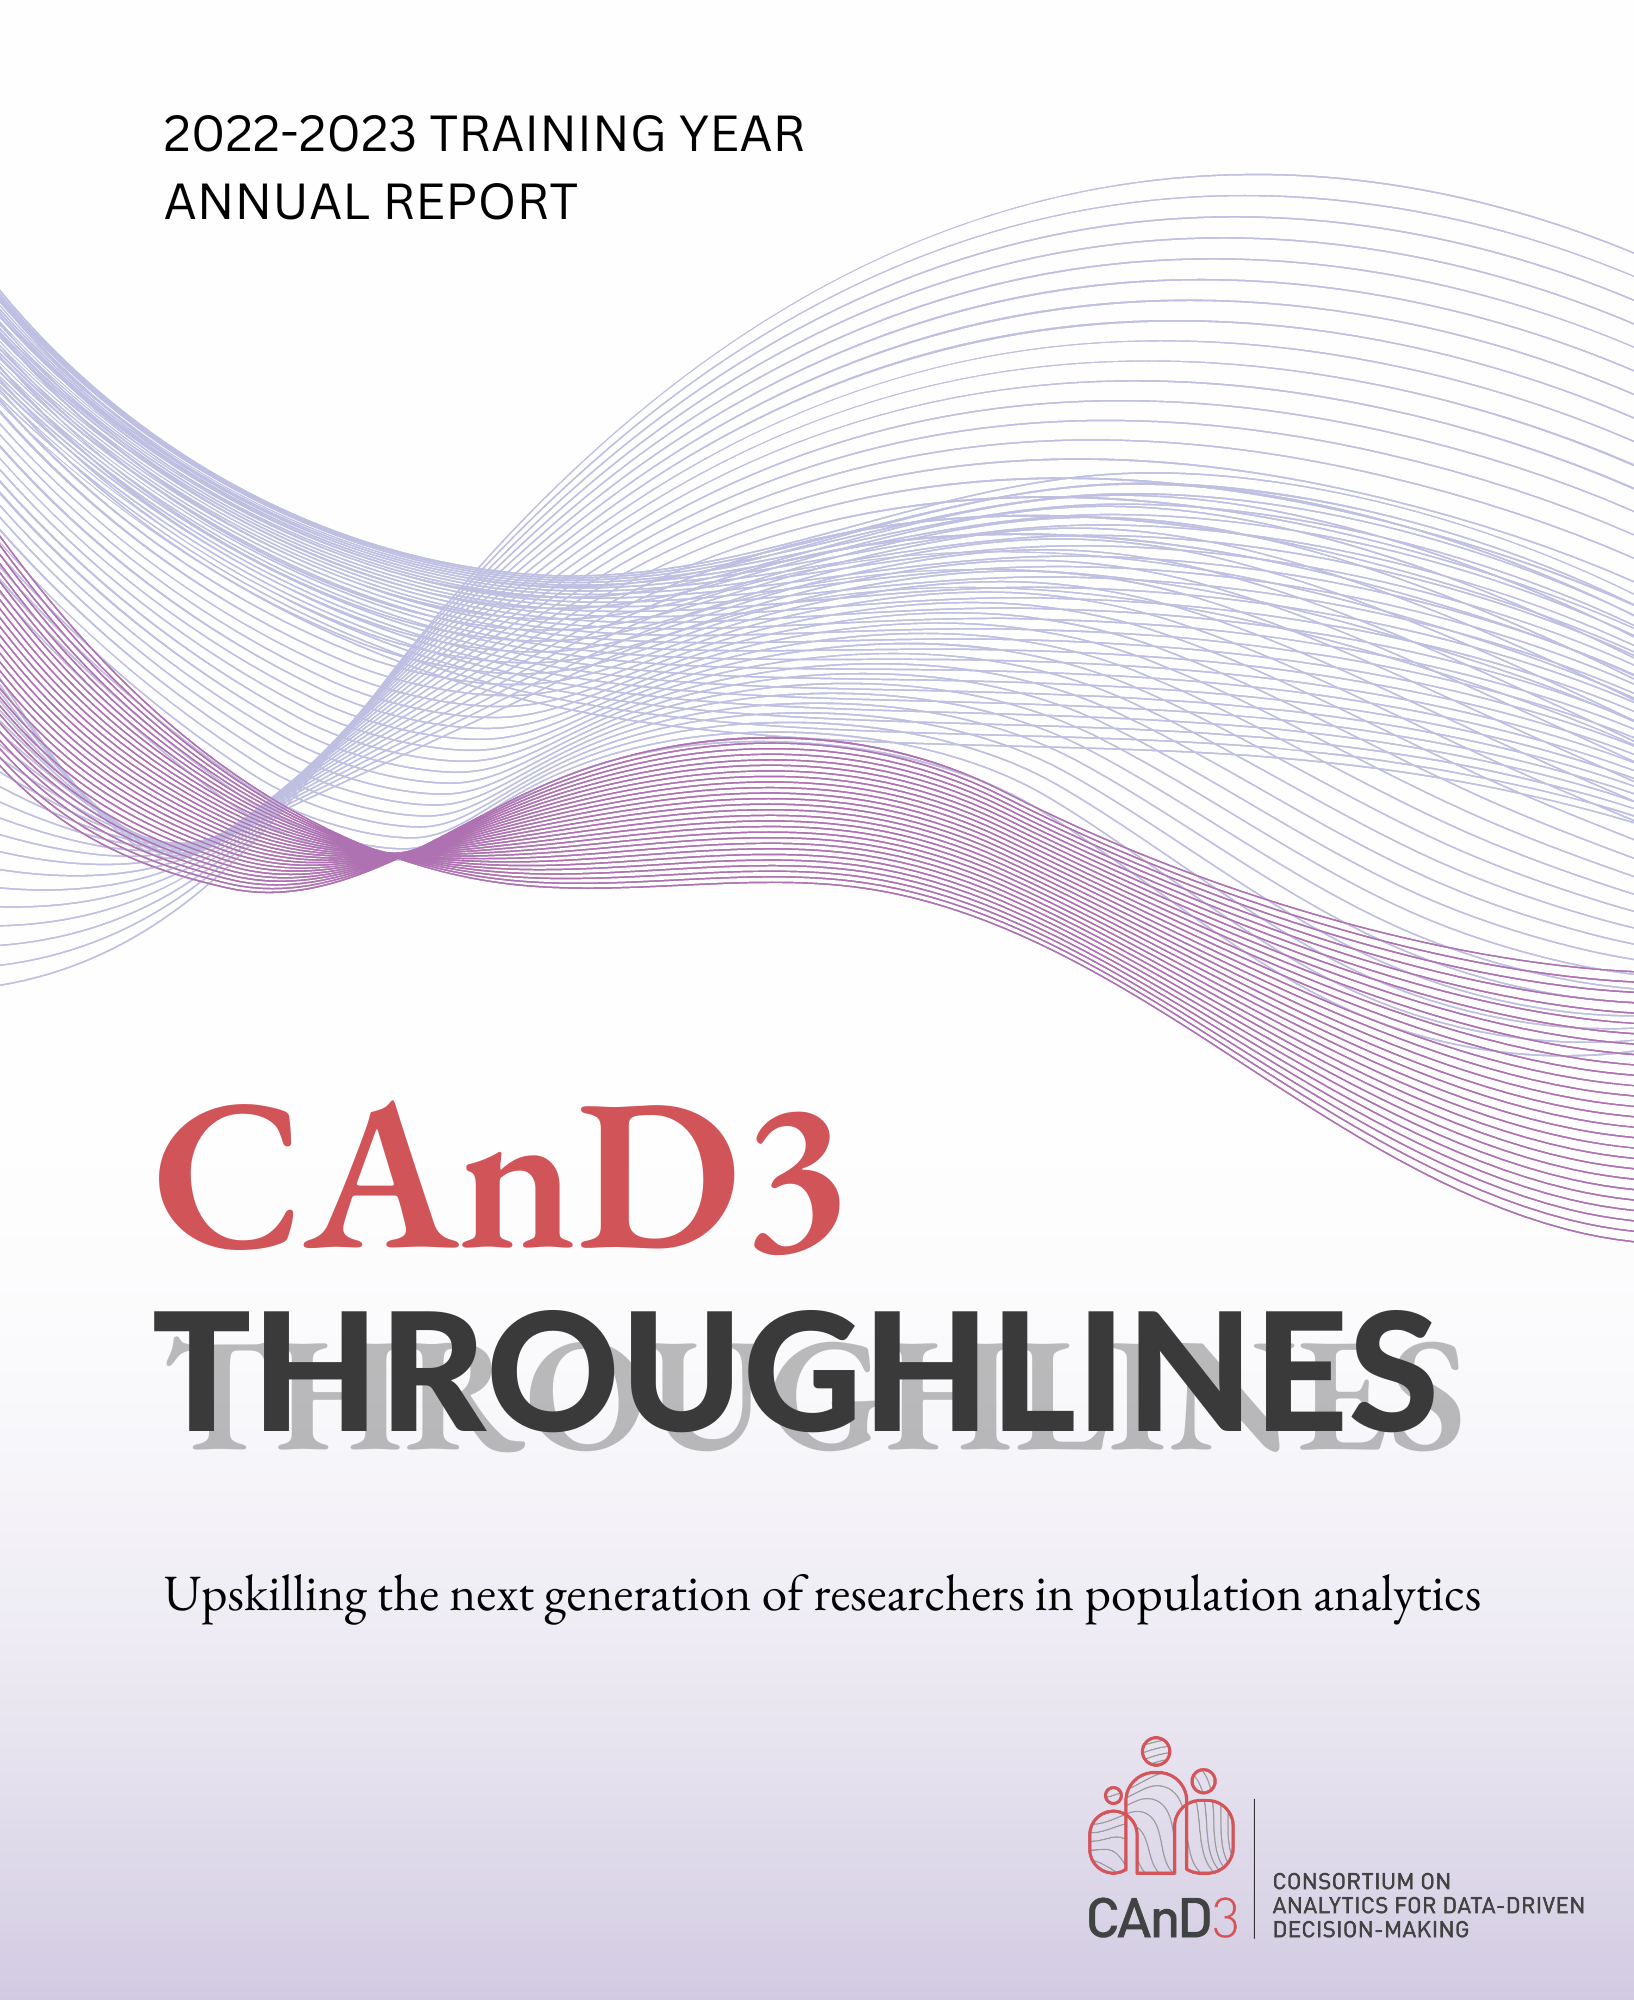 Annual report cover page with images of swirls representing CAnD3's logo